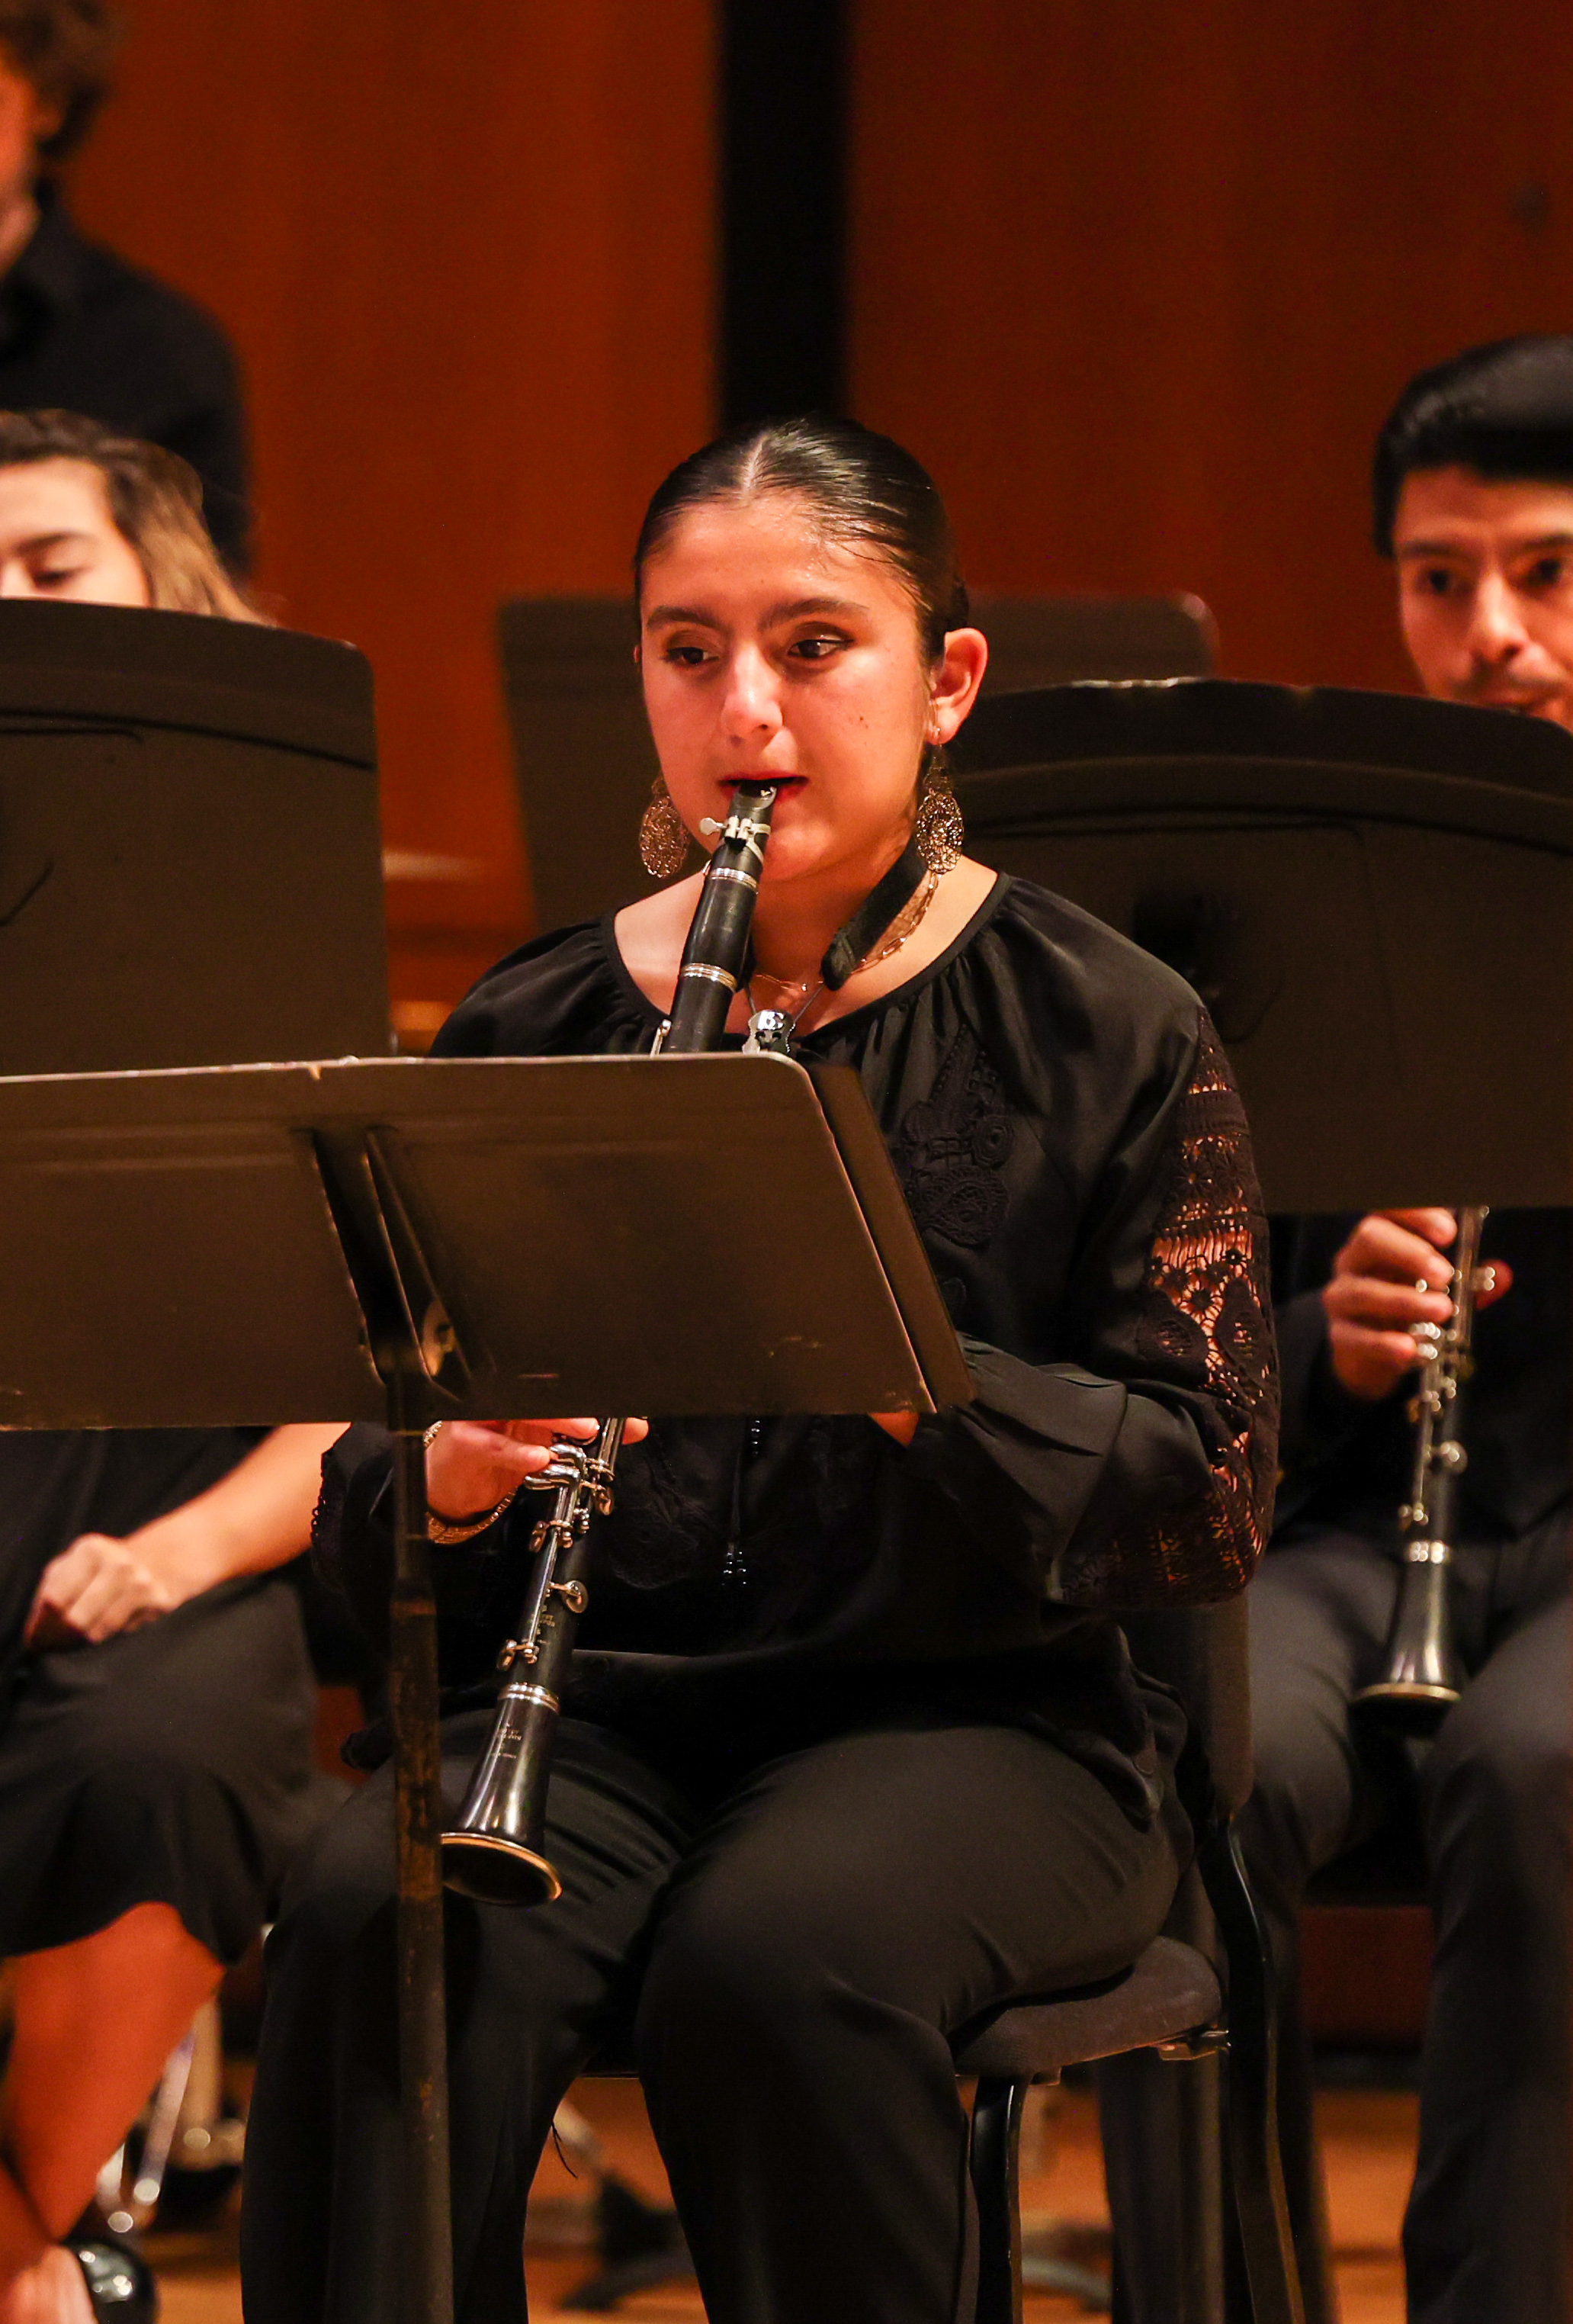 Clarinet player performing in the Moores Opera House